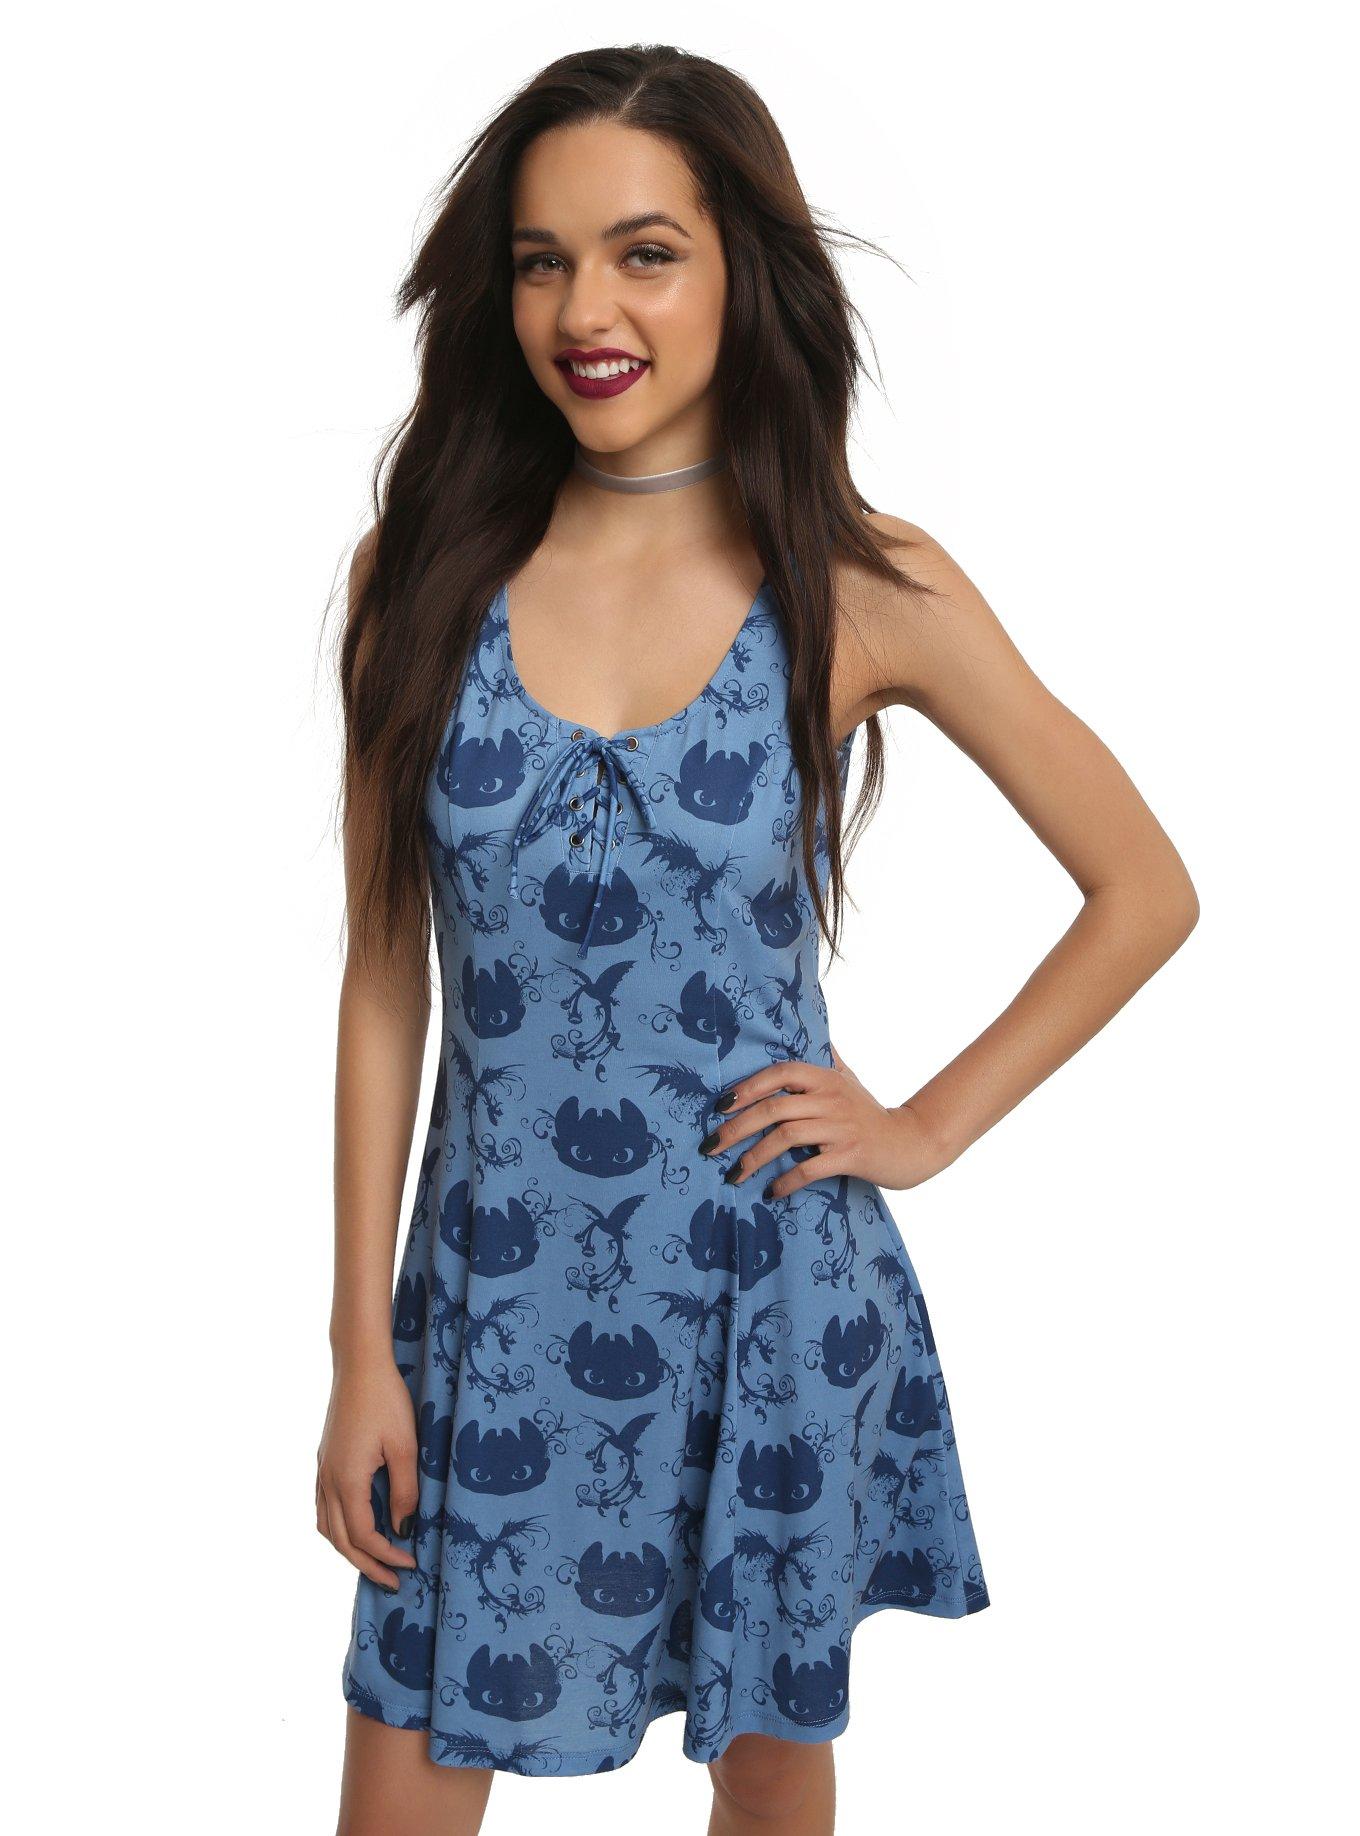 How To Train Your Dragon Toothless Print Dress, BLUE, hi-res